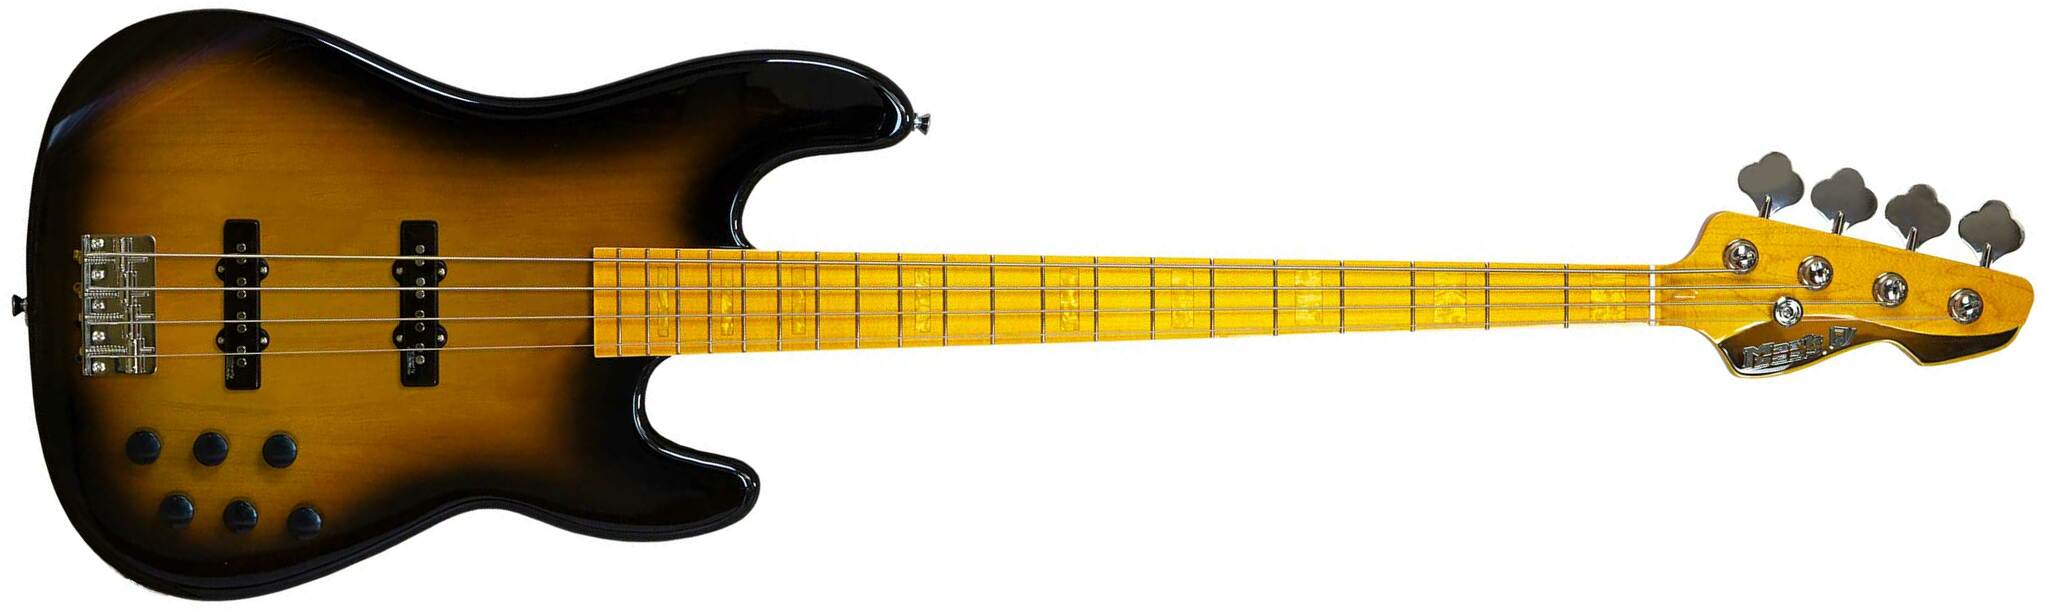 Markbass Mb Gv 4 Gloxy Val Cr Mp Active Mn - Tobacco Sunburst - Solid body electric bass - Main picture